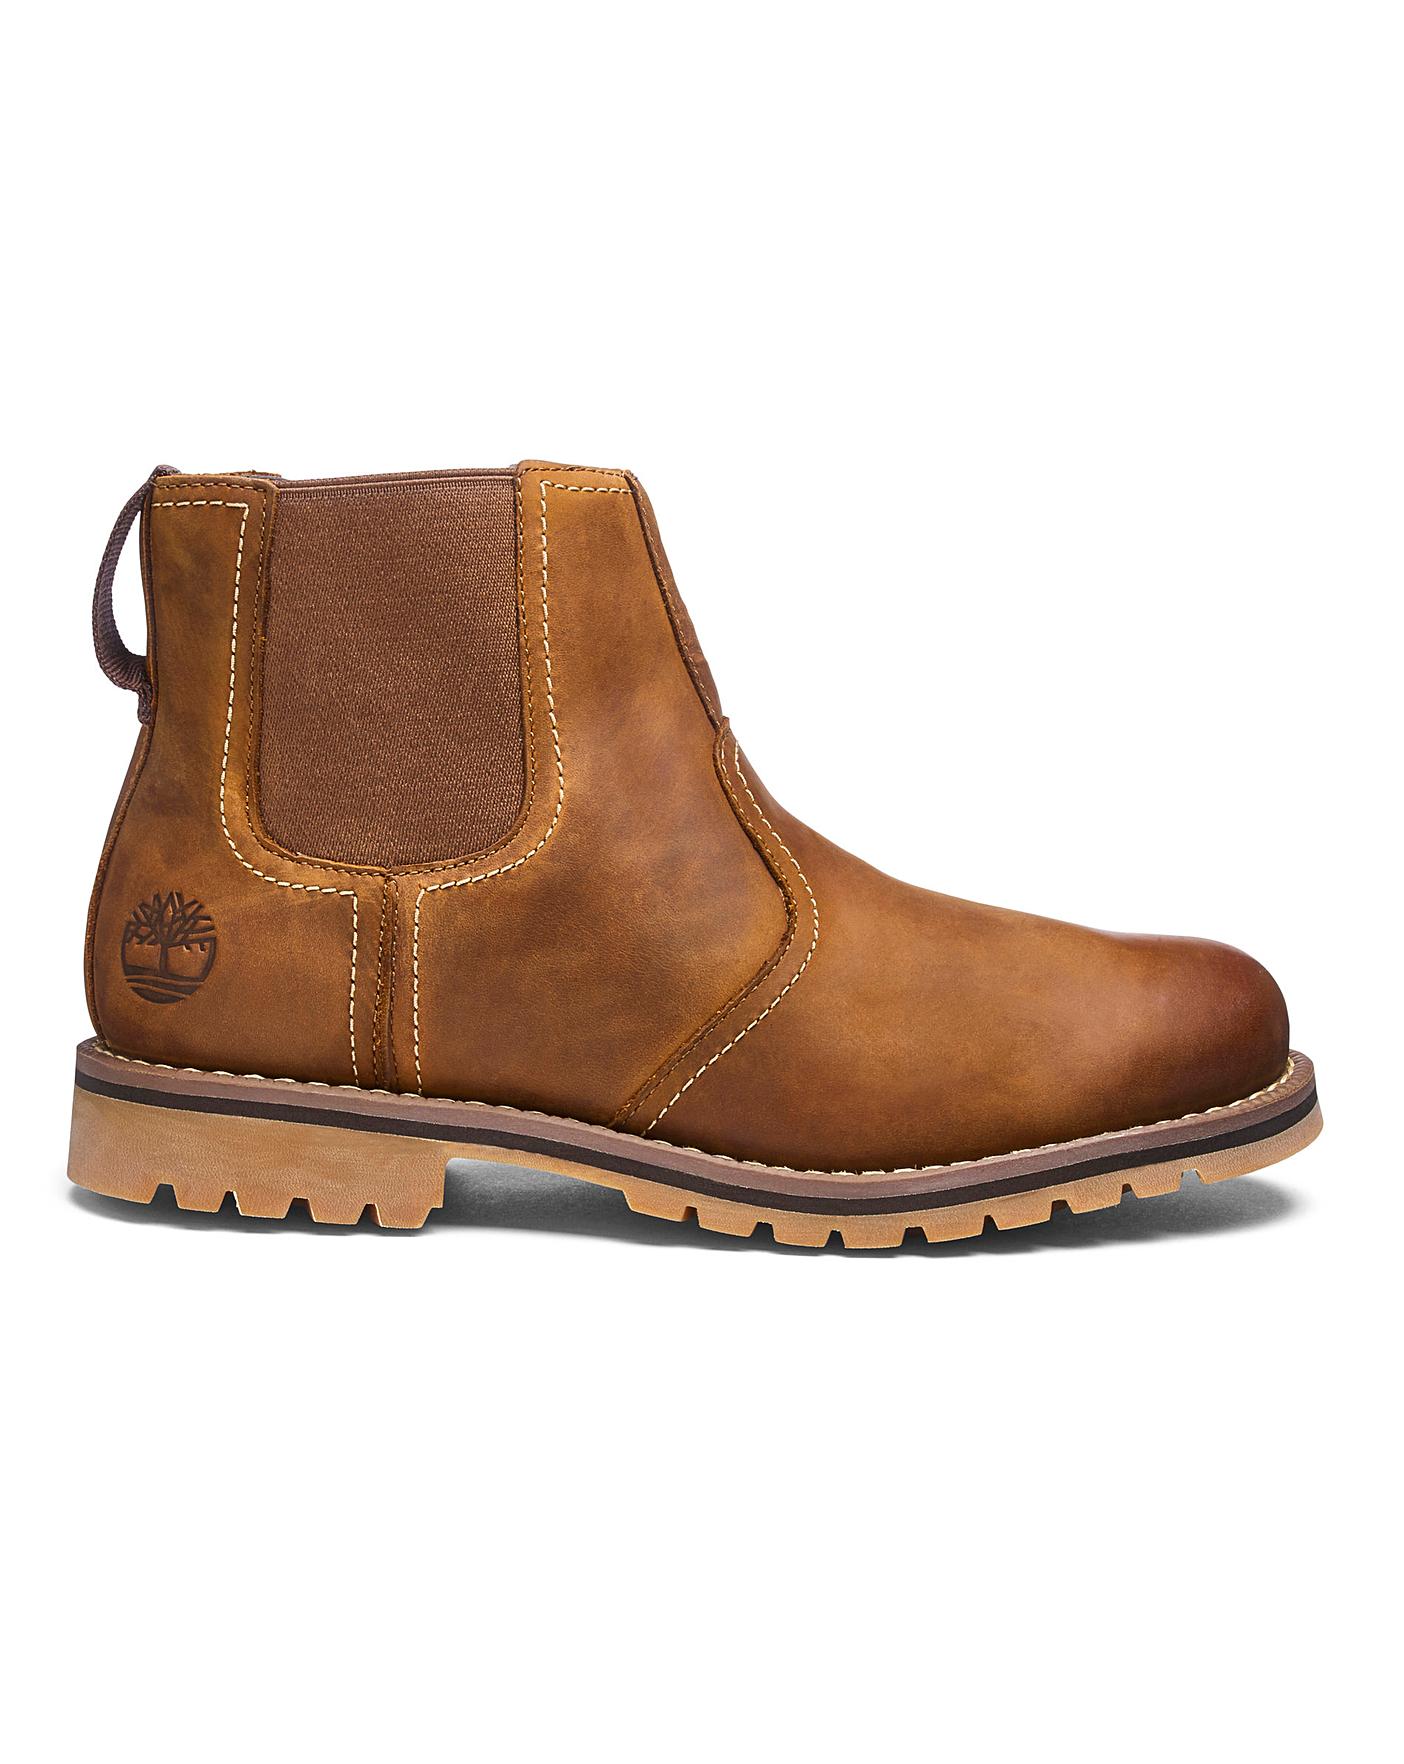 Timberland Larchmont Chelsea Boots 